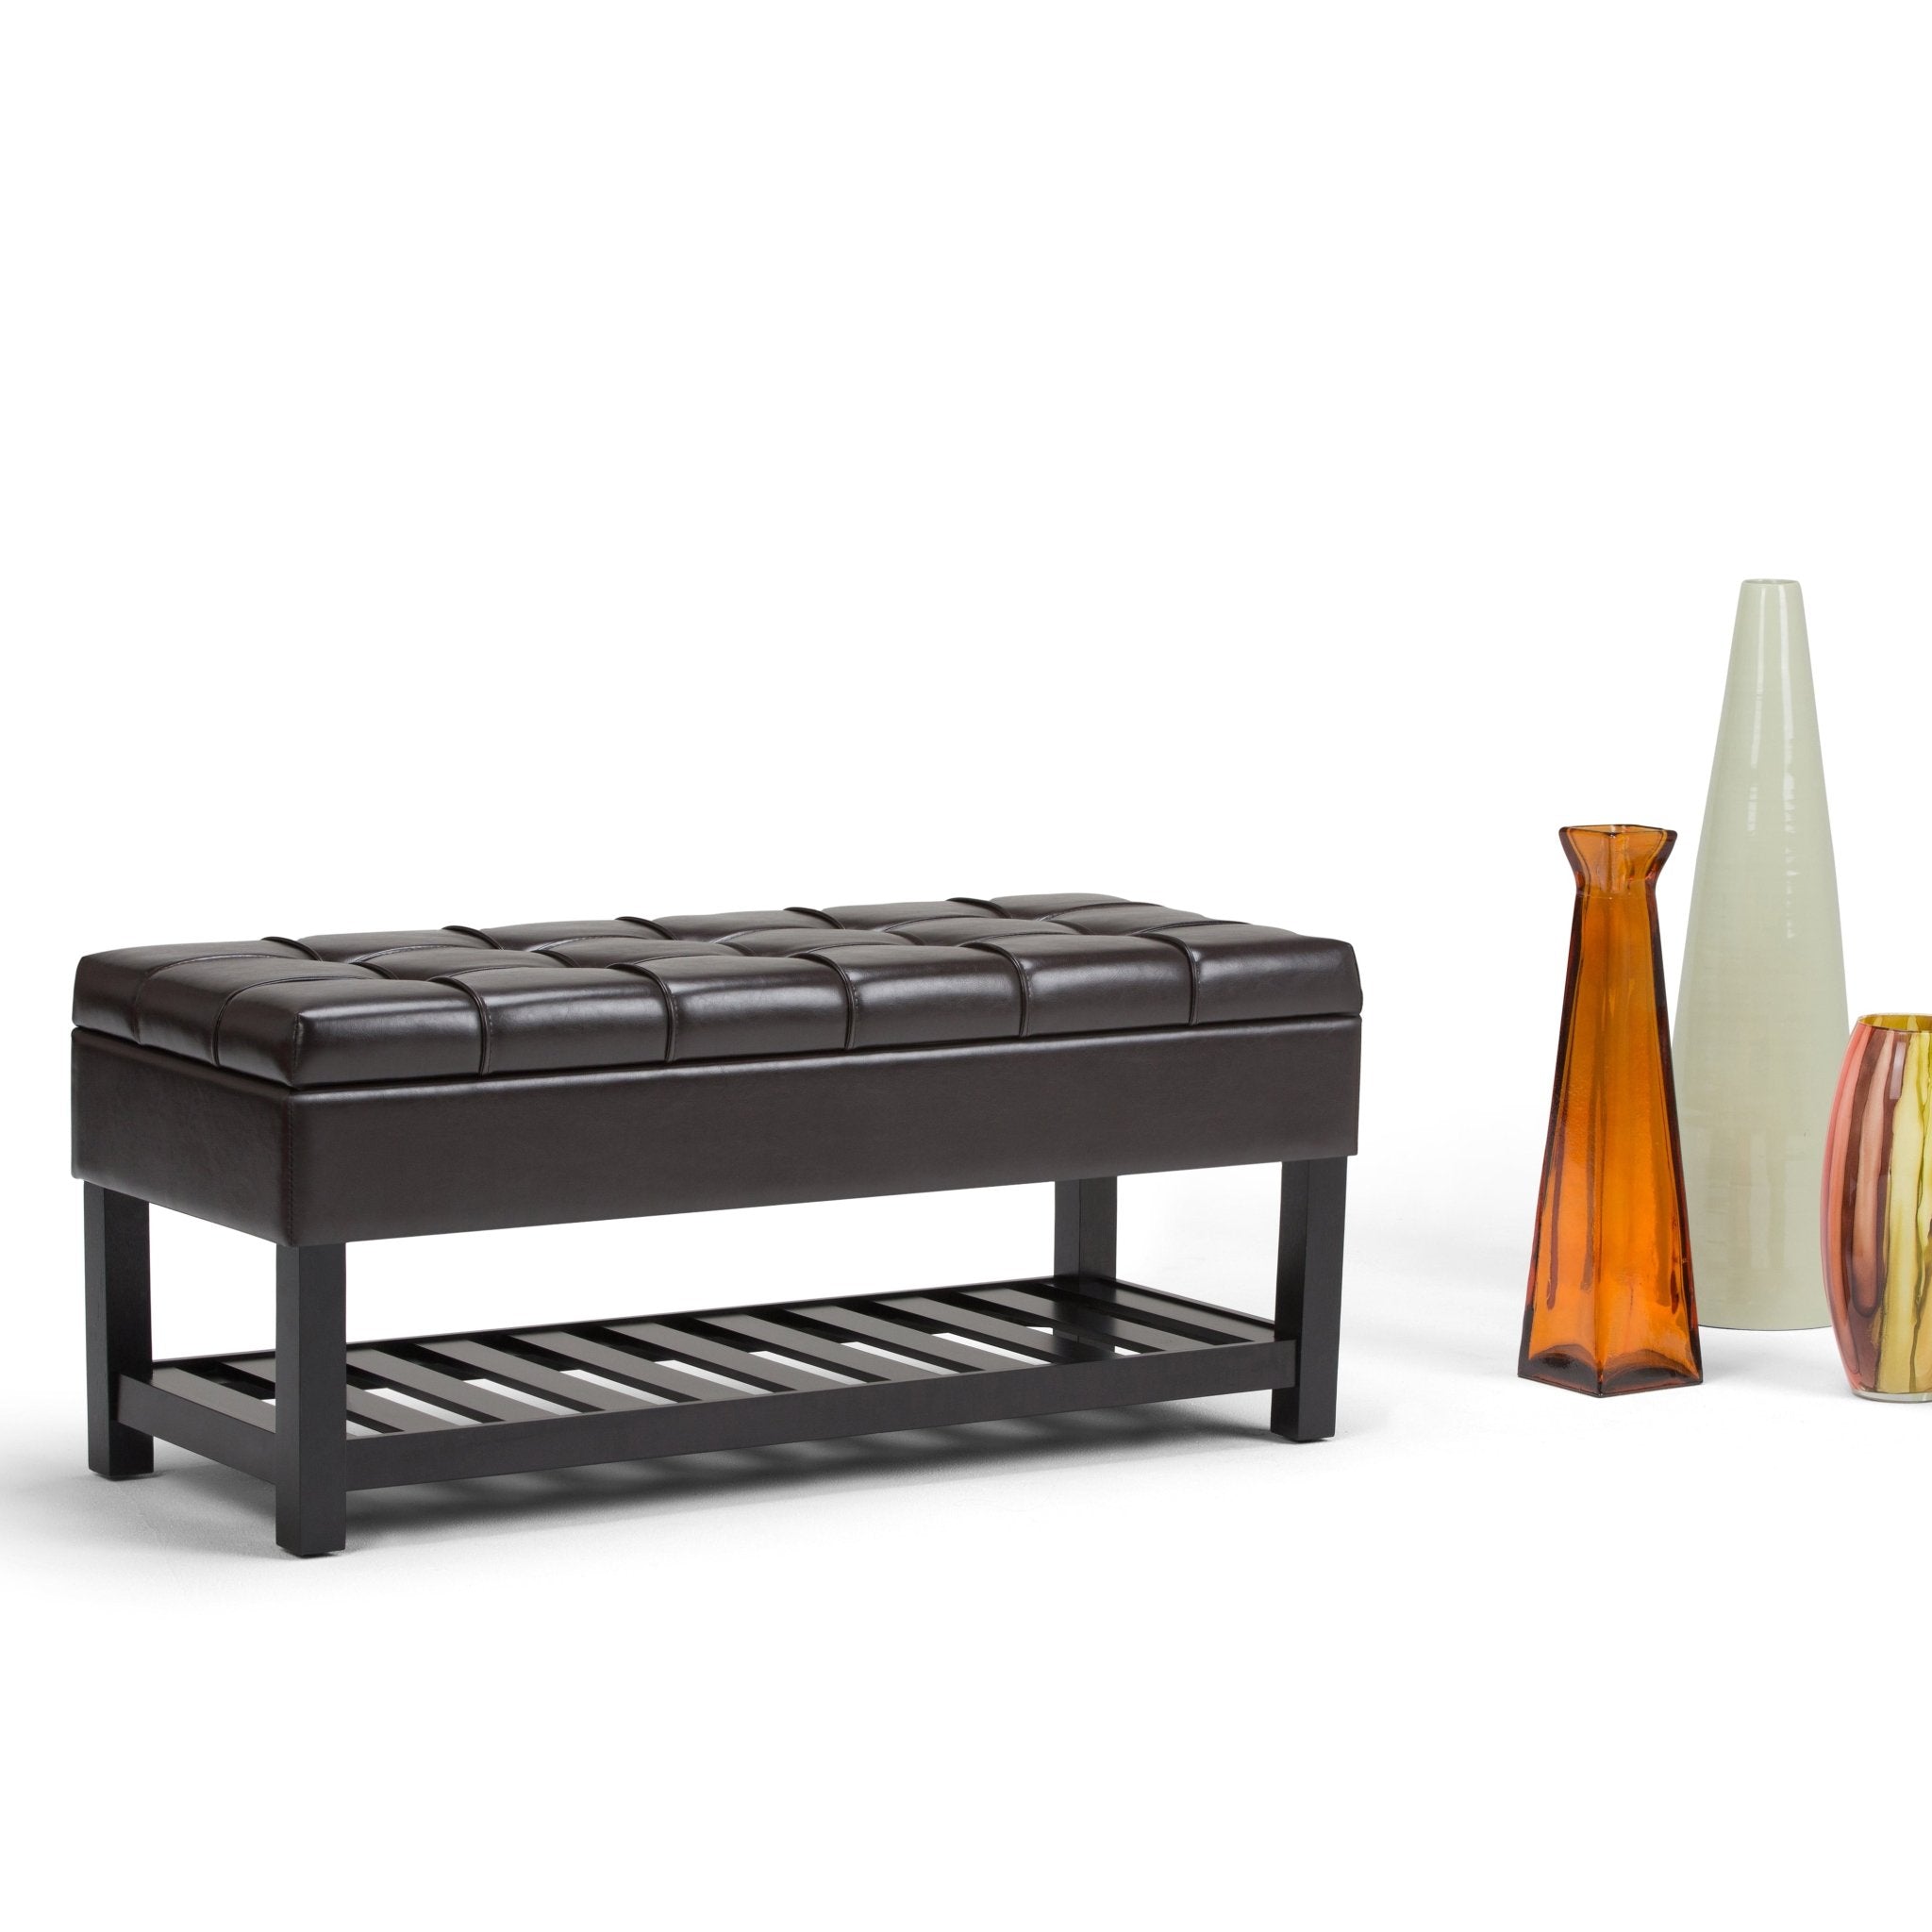 Novaesque Upholstered Storage Bench with Stitched Tufted Top and Open Slat Bottom Shelf - Benches